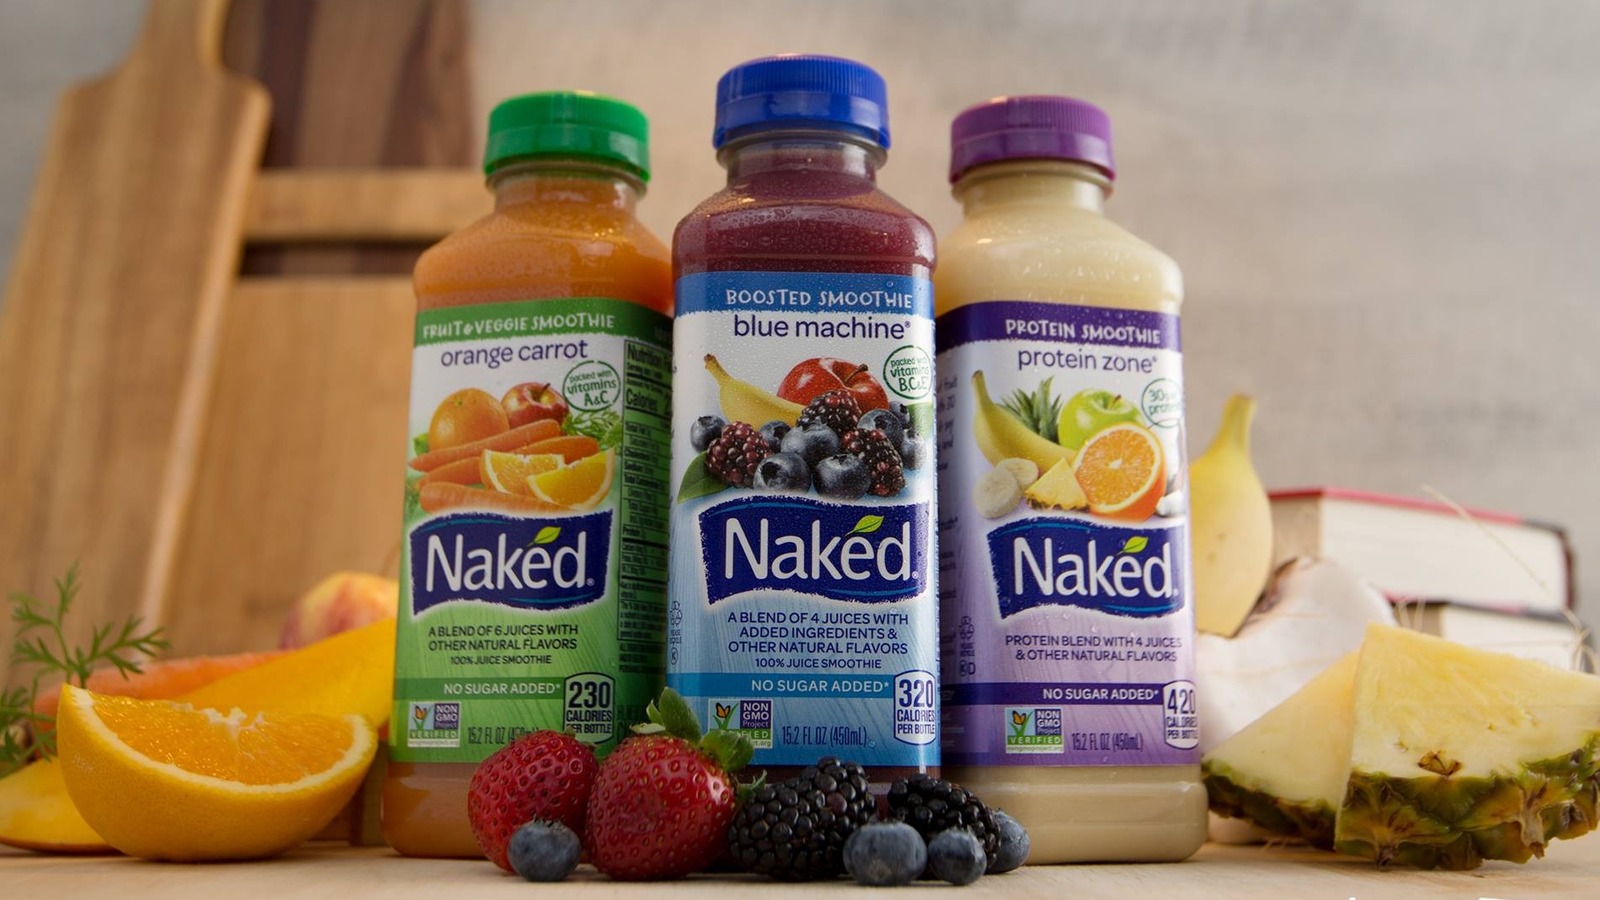 Hot drink: Naked blue machine blueberry smoothie and red machine